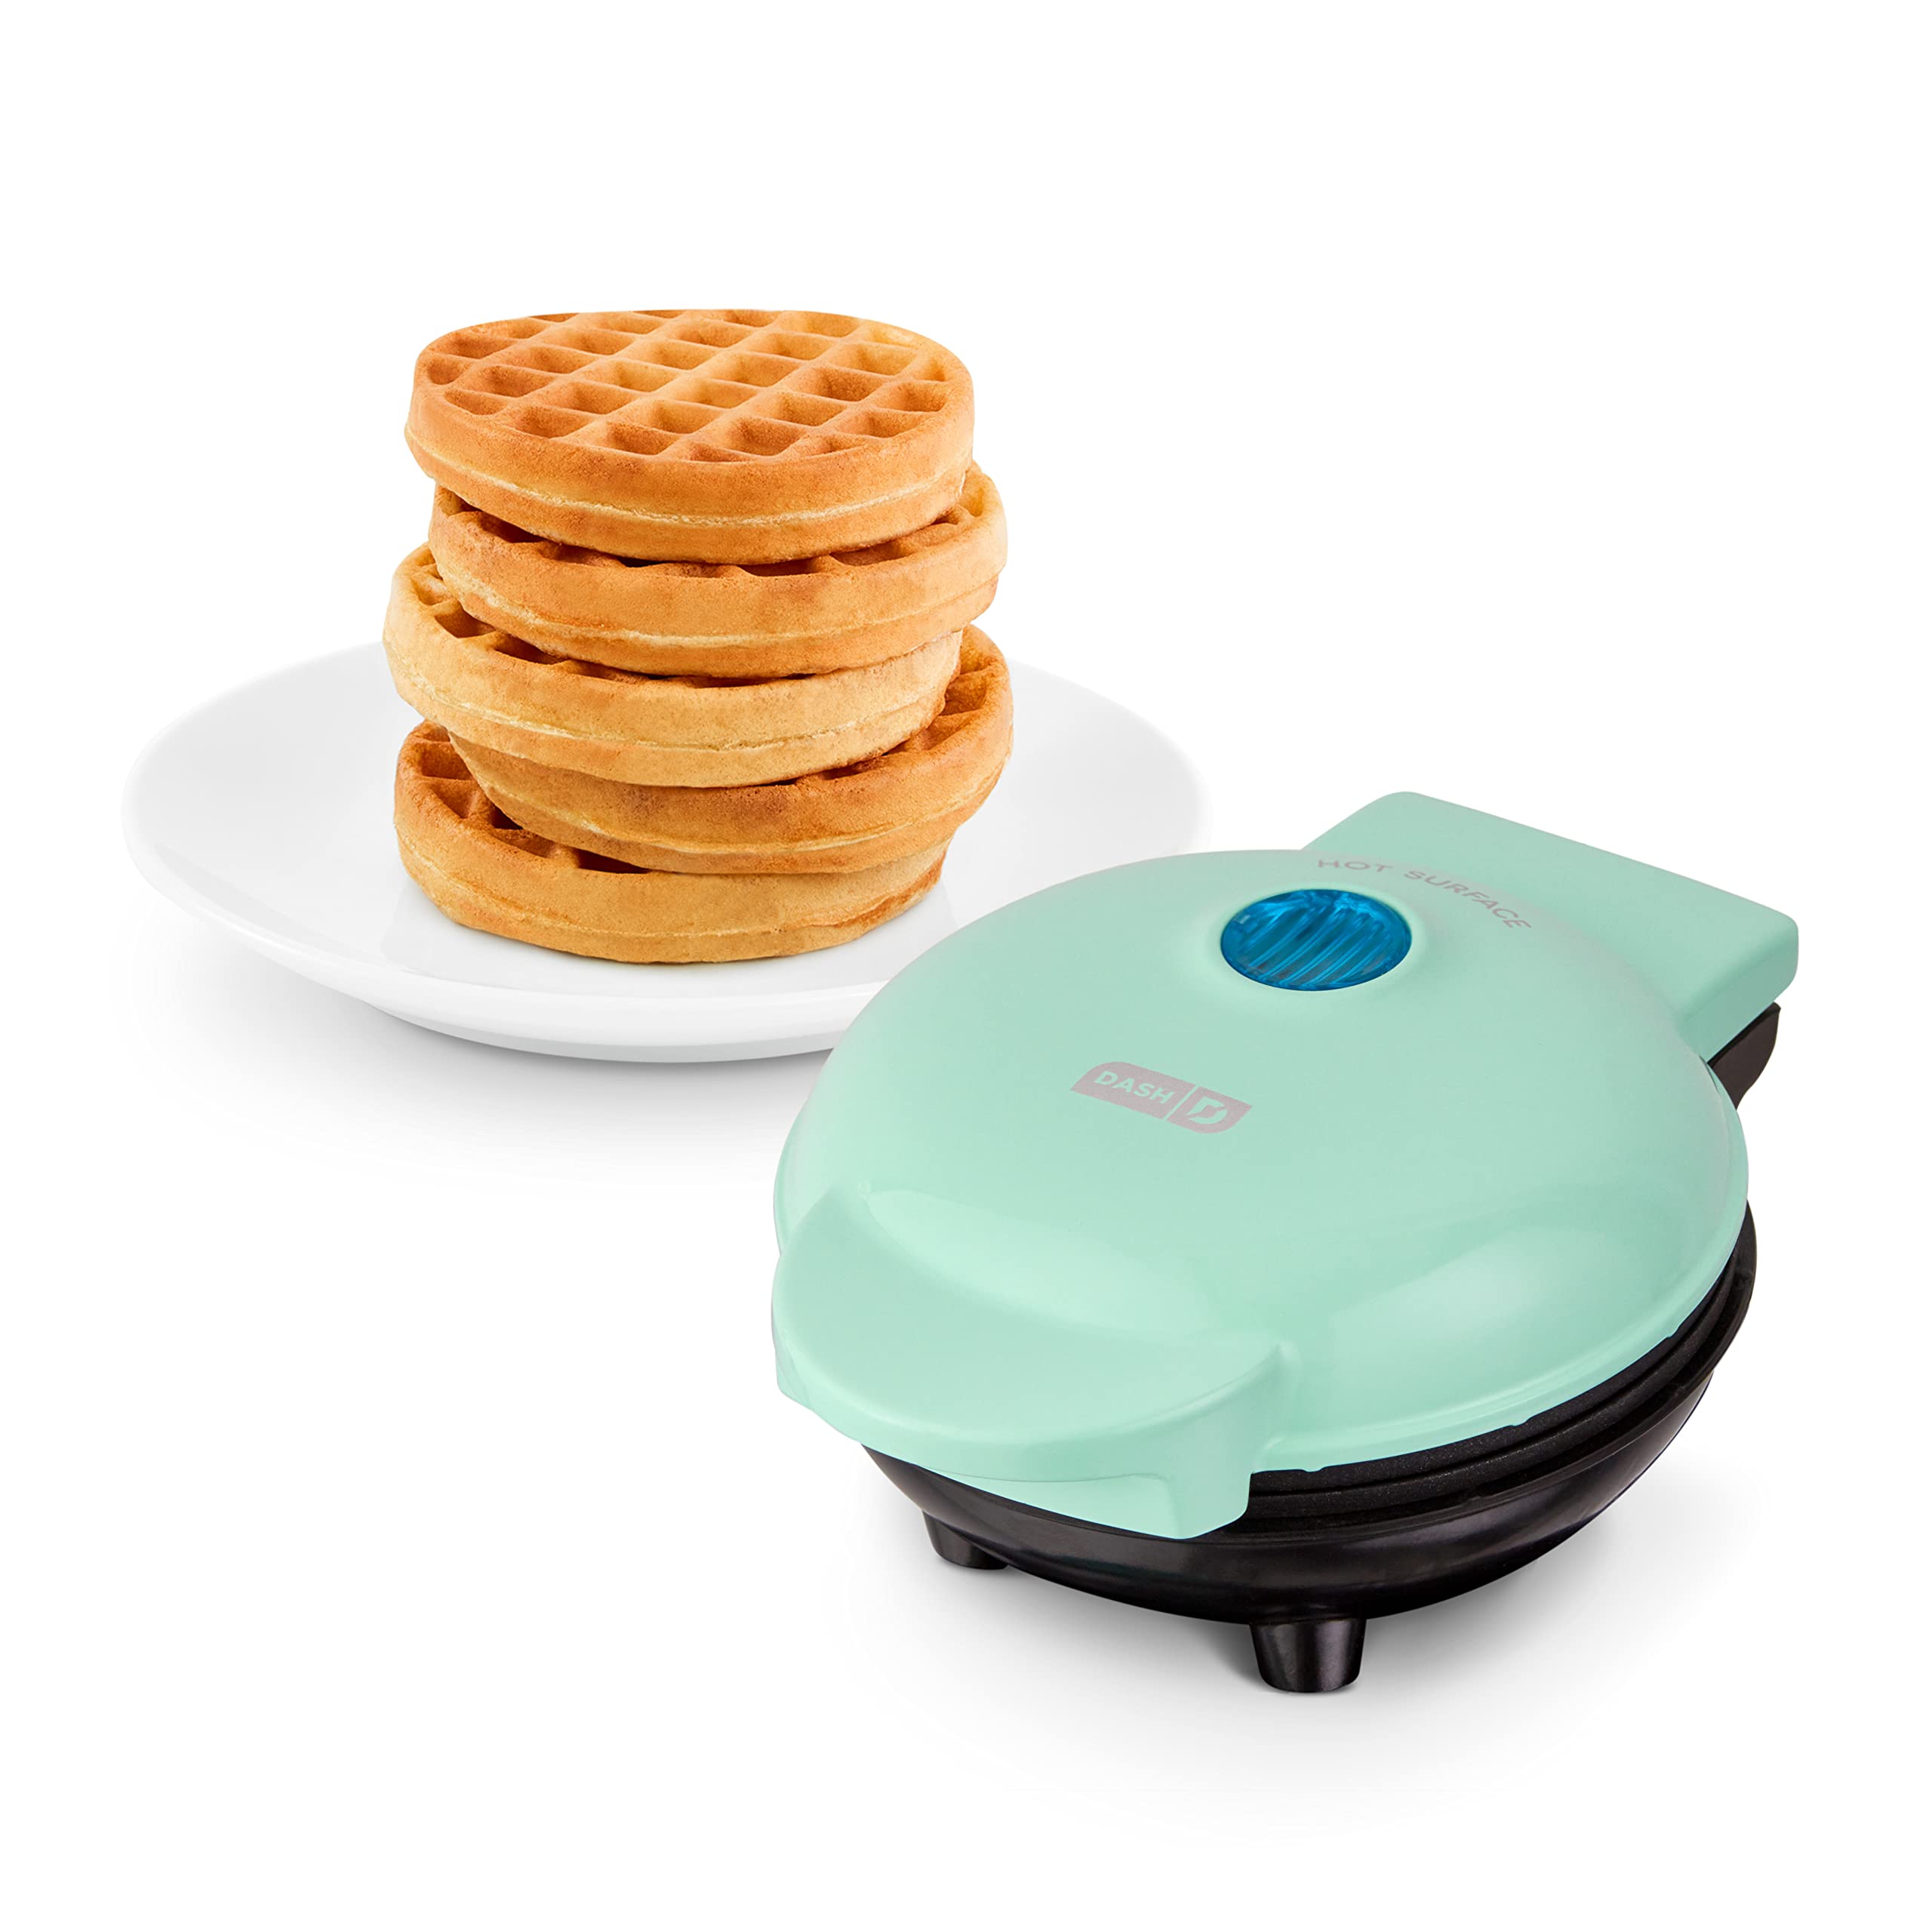 Dash 4 In. Red Mini Waffle Maker DMW001RD